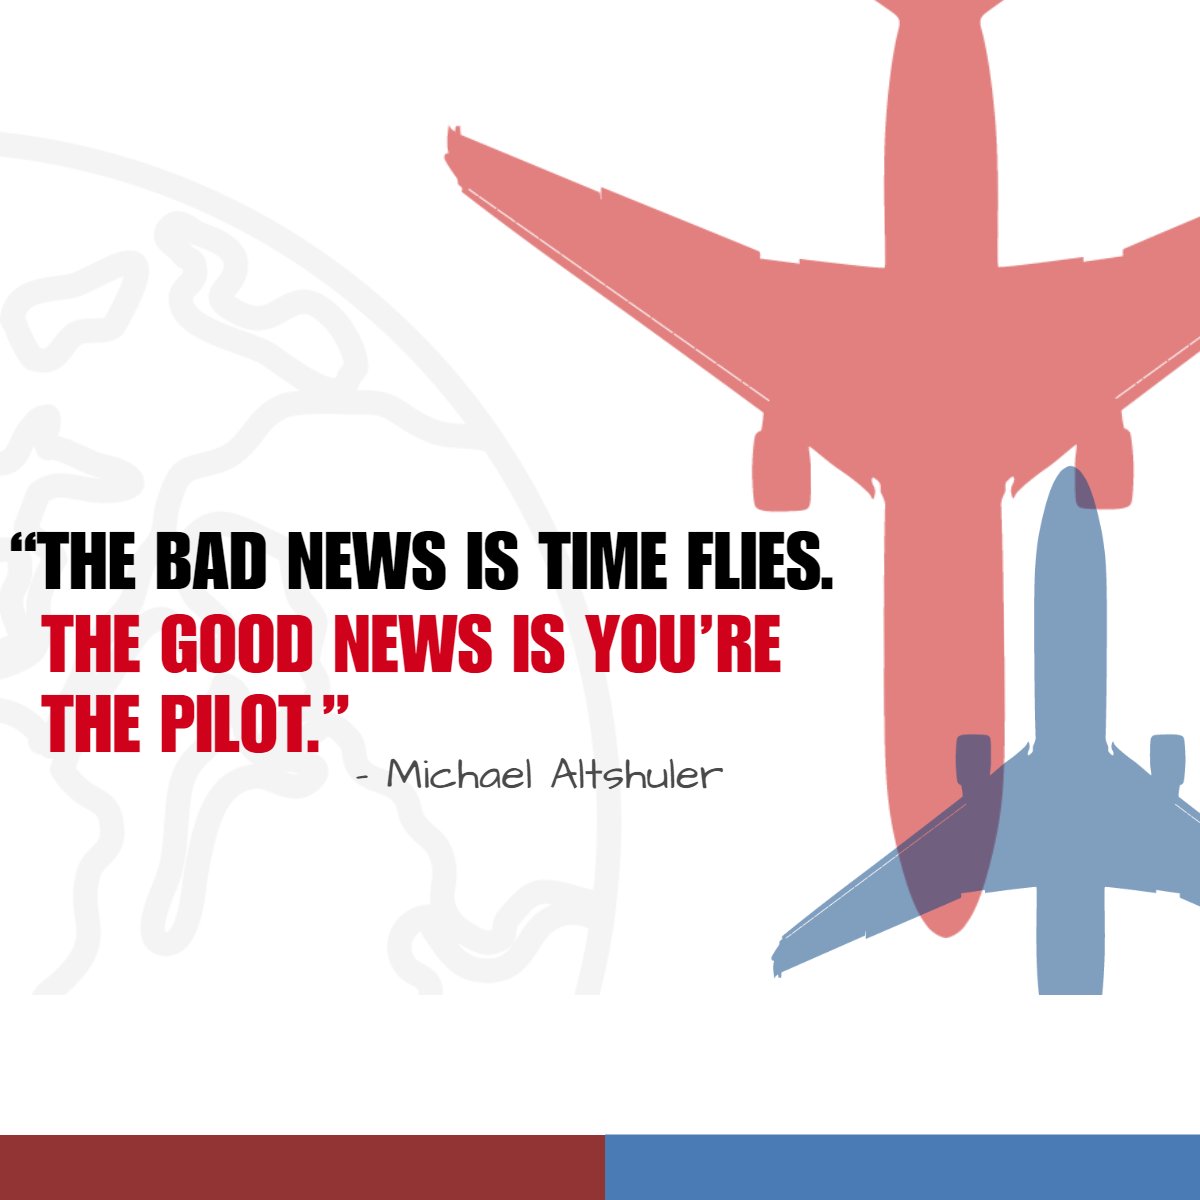 “The bad news is time flies. The good news is you’re the pilot.” 
– Michael Altshuler

 #instaquote    #wisdom    #quoteoftheday 
#RacingRealEstateAgent #BarrettRealEstate #StoneTreeRealEstateTeam #maricopaazrealestate #racingagent #arizonarealestate